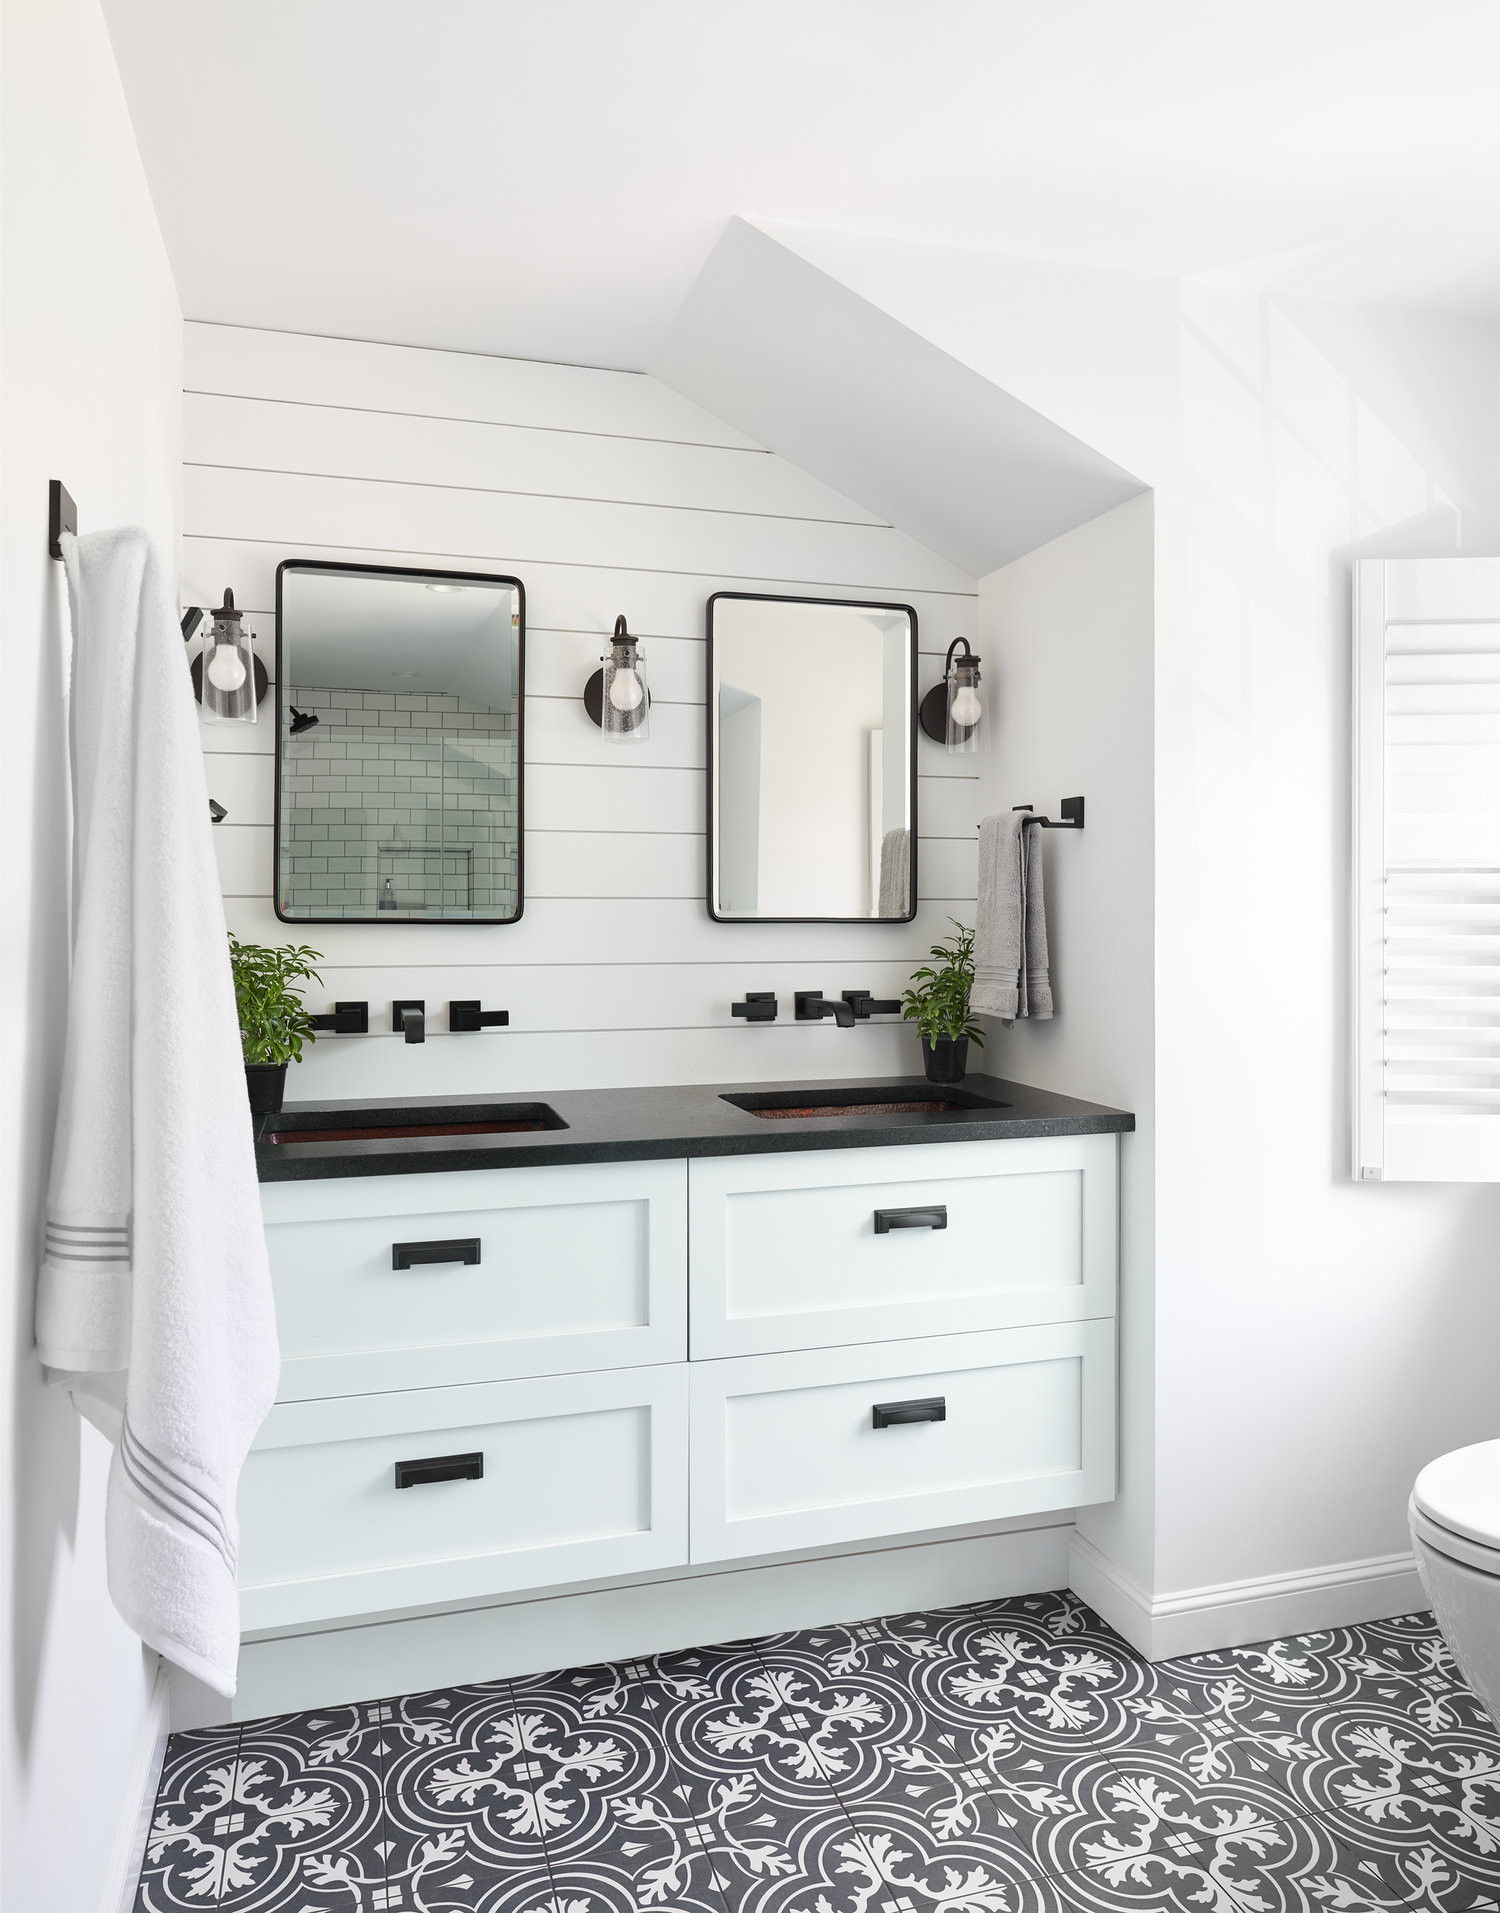 75 Beautiful Shiplap Wall Bathroom Pictures Ideas July 2020